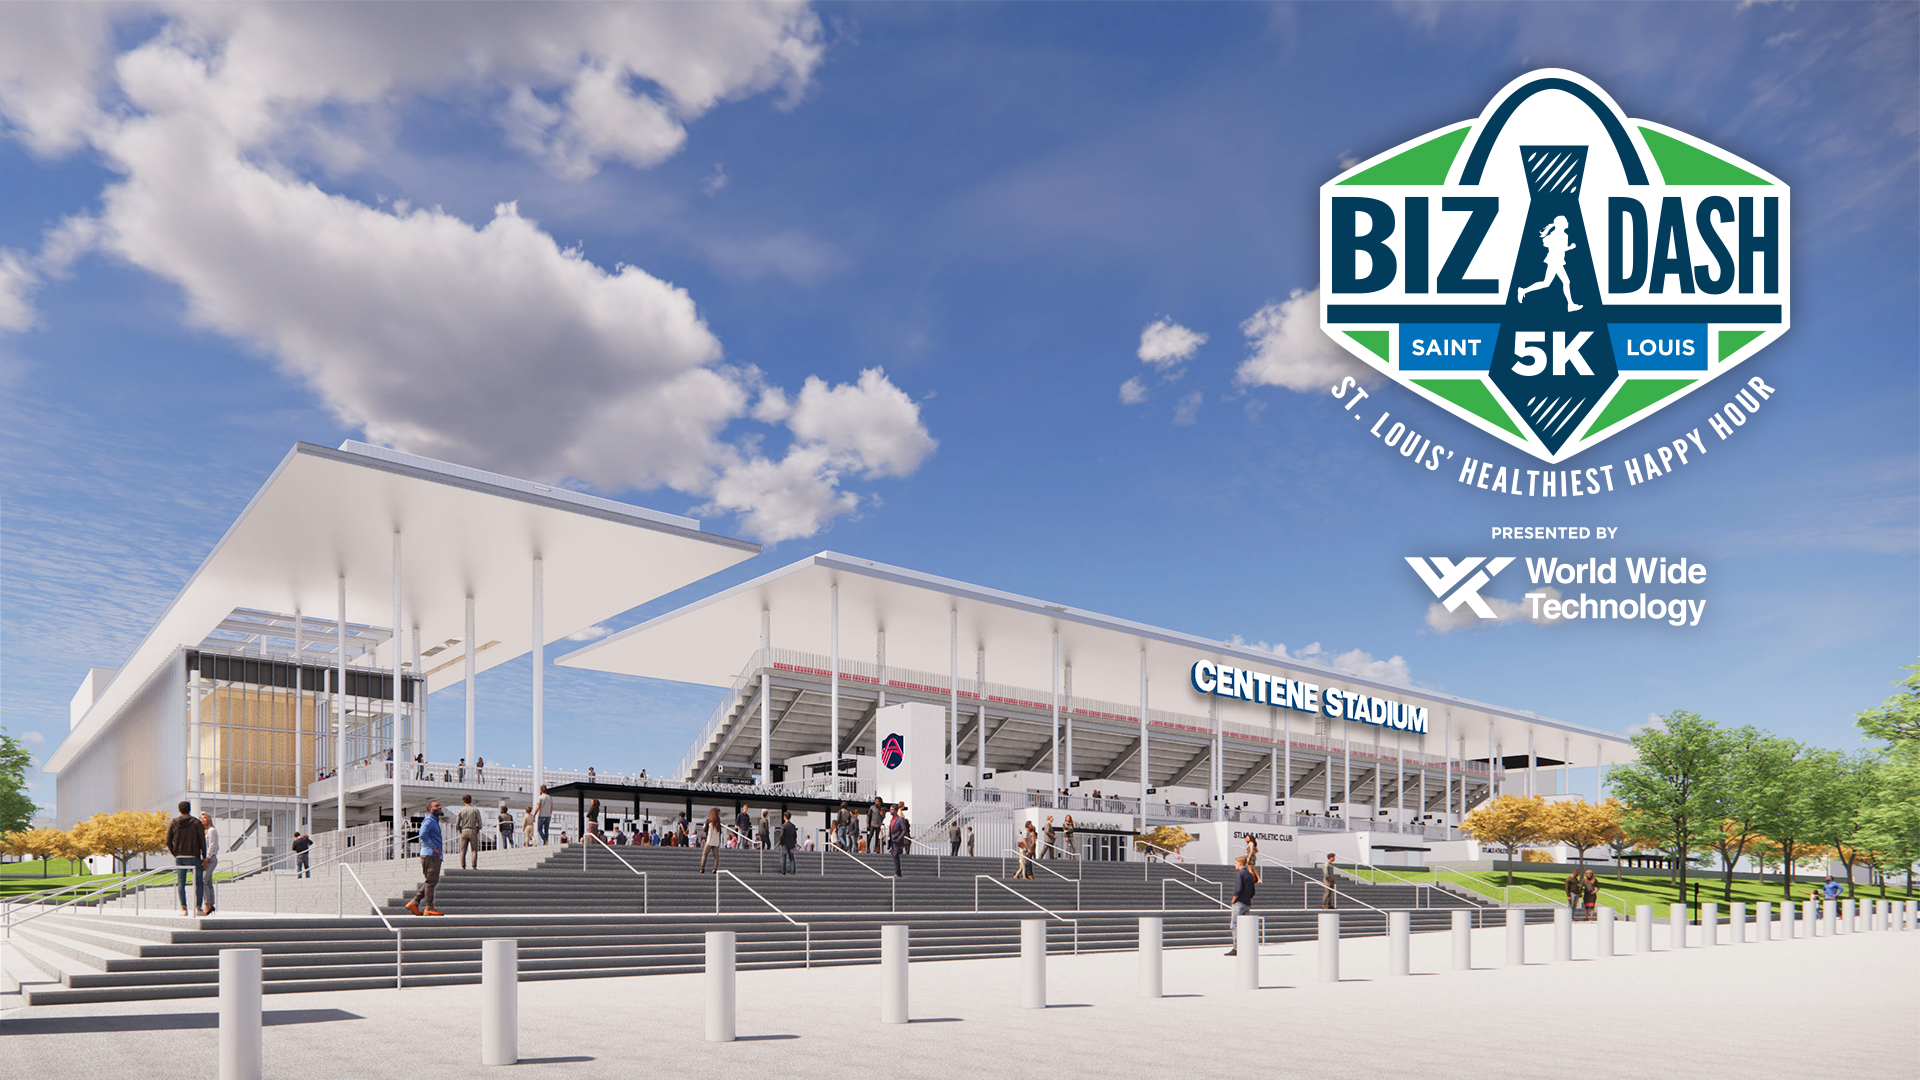 2022 Biz Dash Presented By World Wide Technology To Take Place At St. Louis CITY SC’s Centene Stadium On Sept. 22